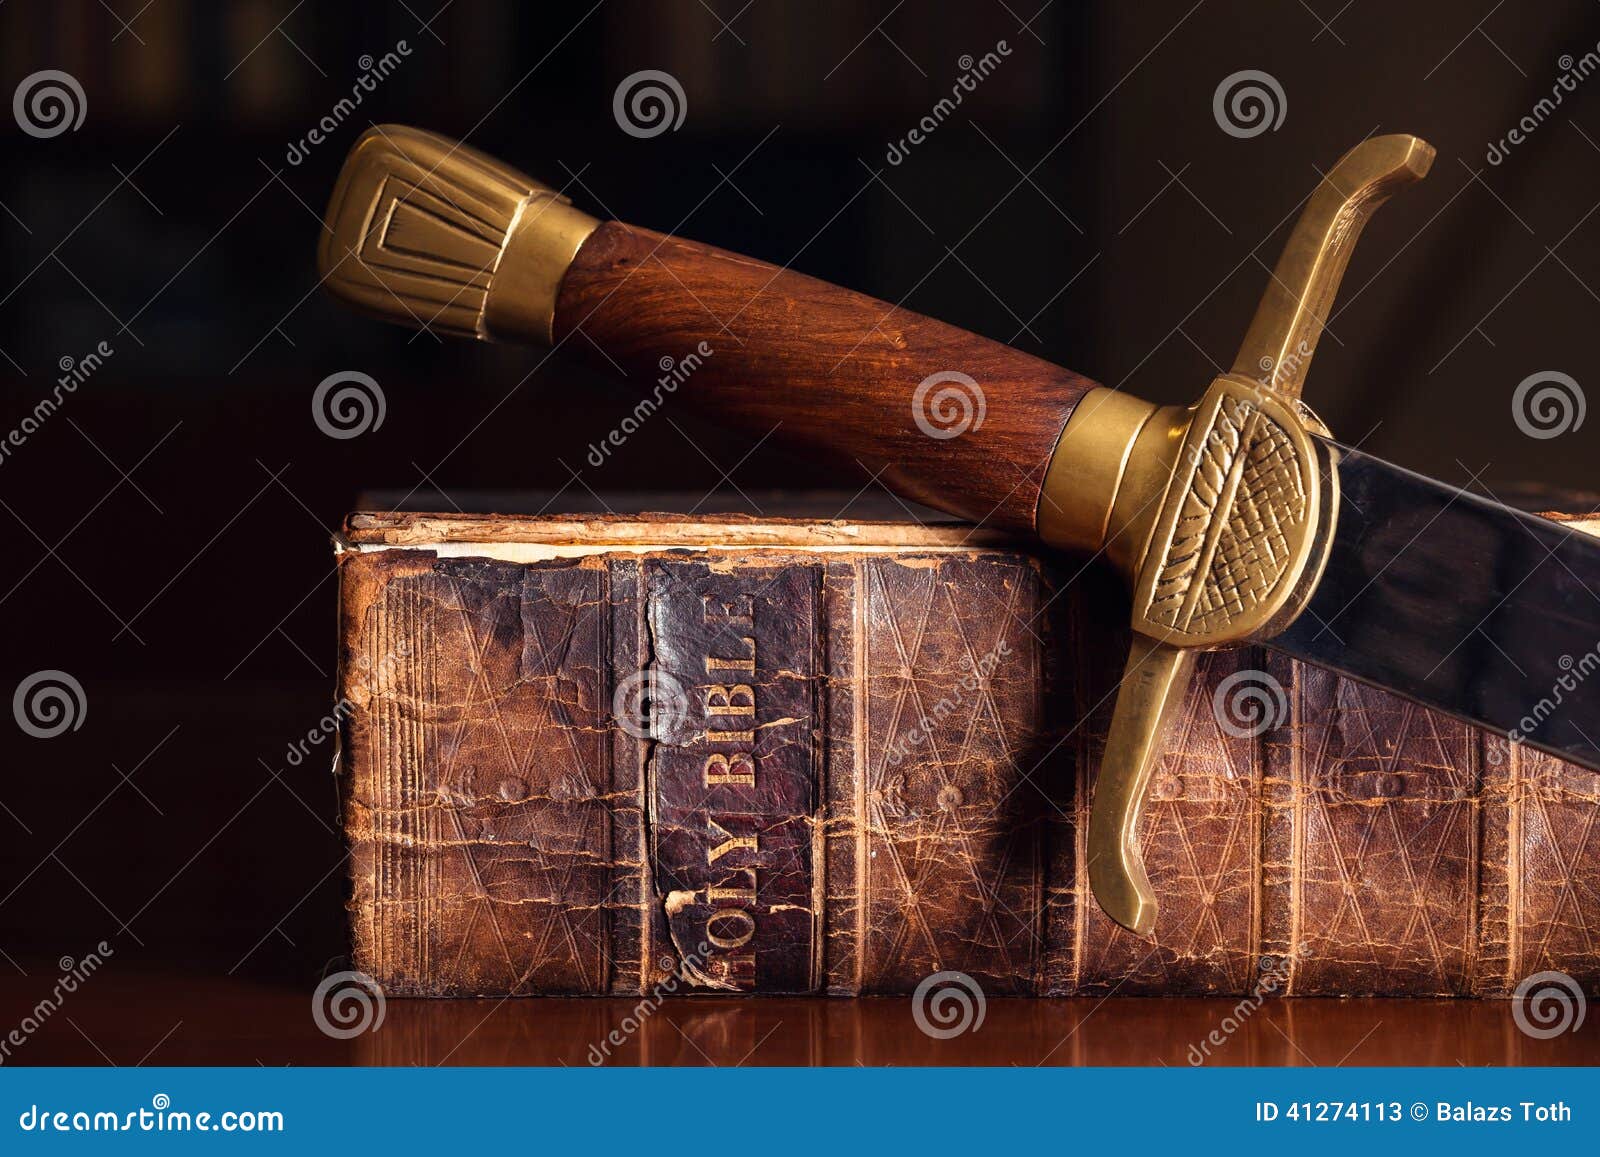 old bible with sword